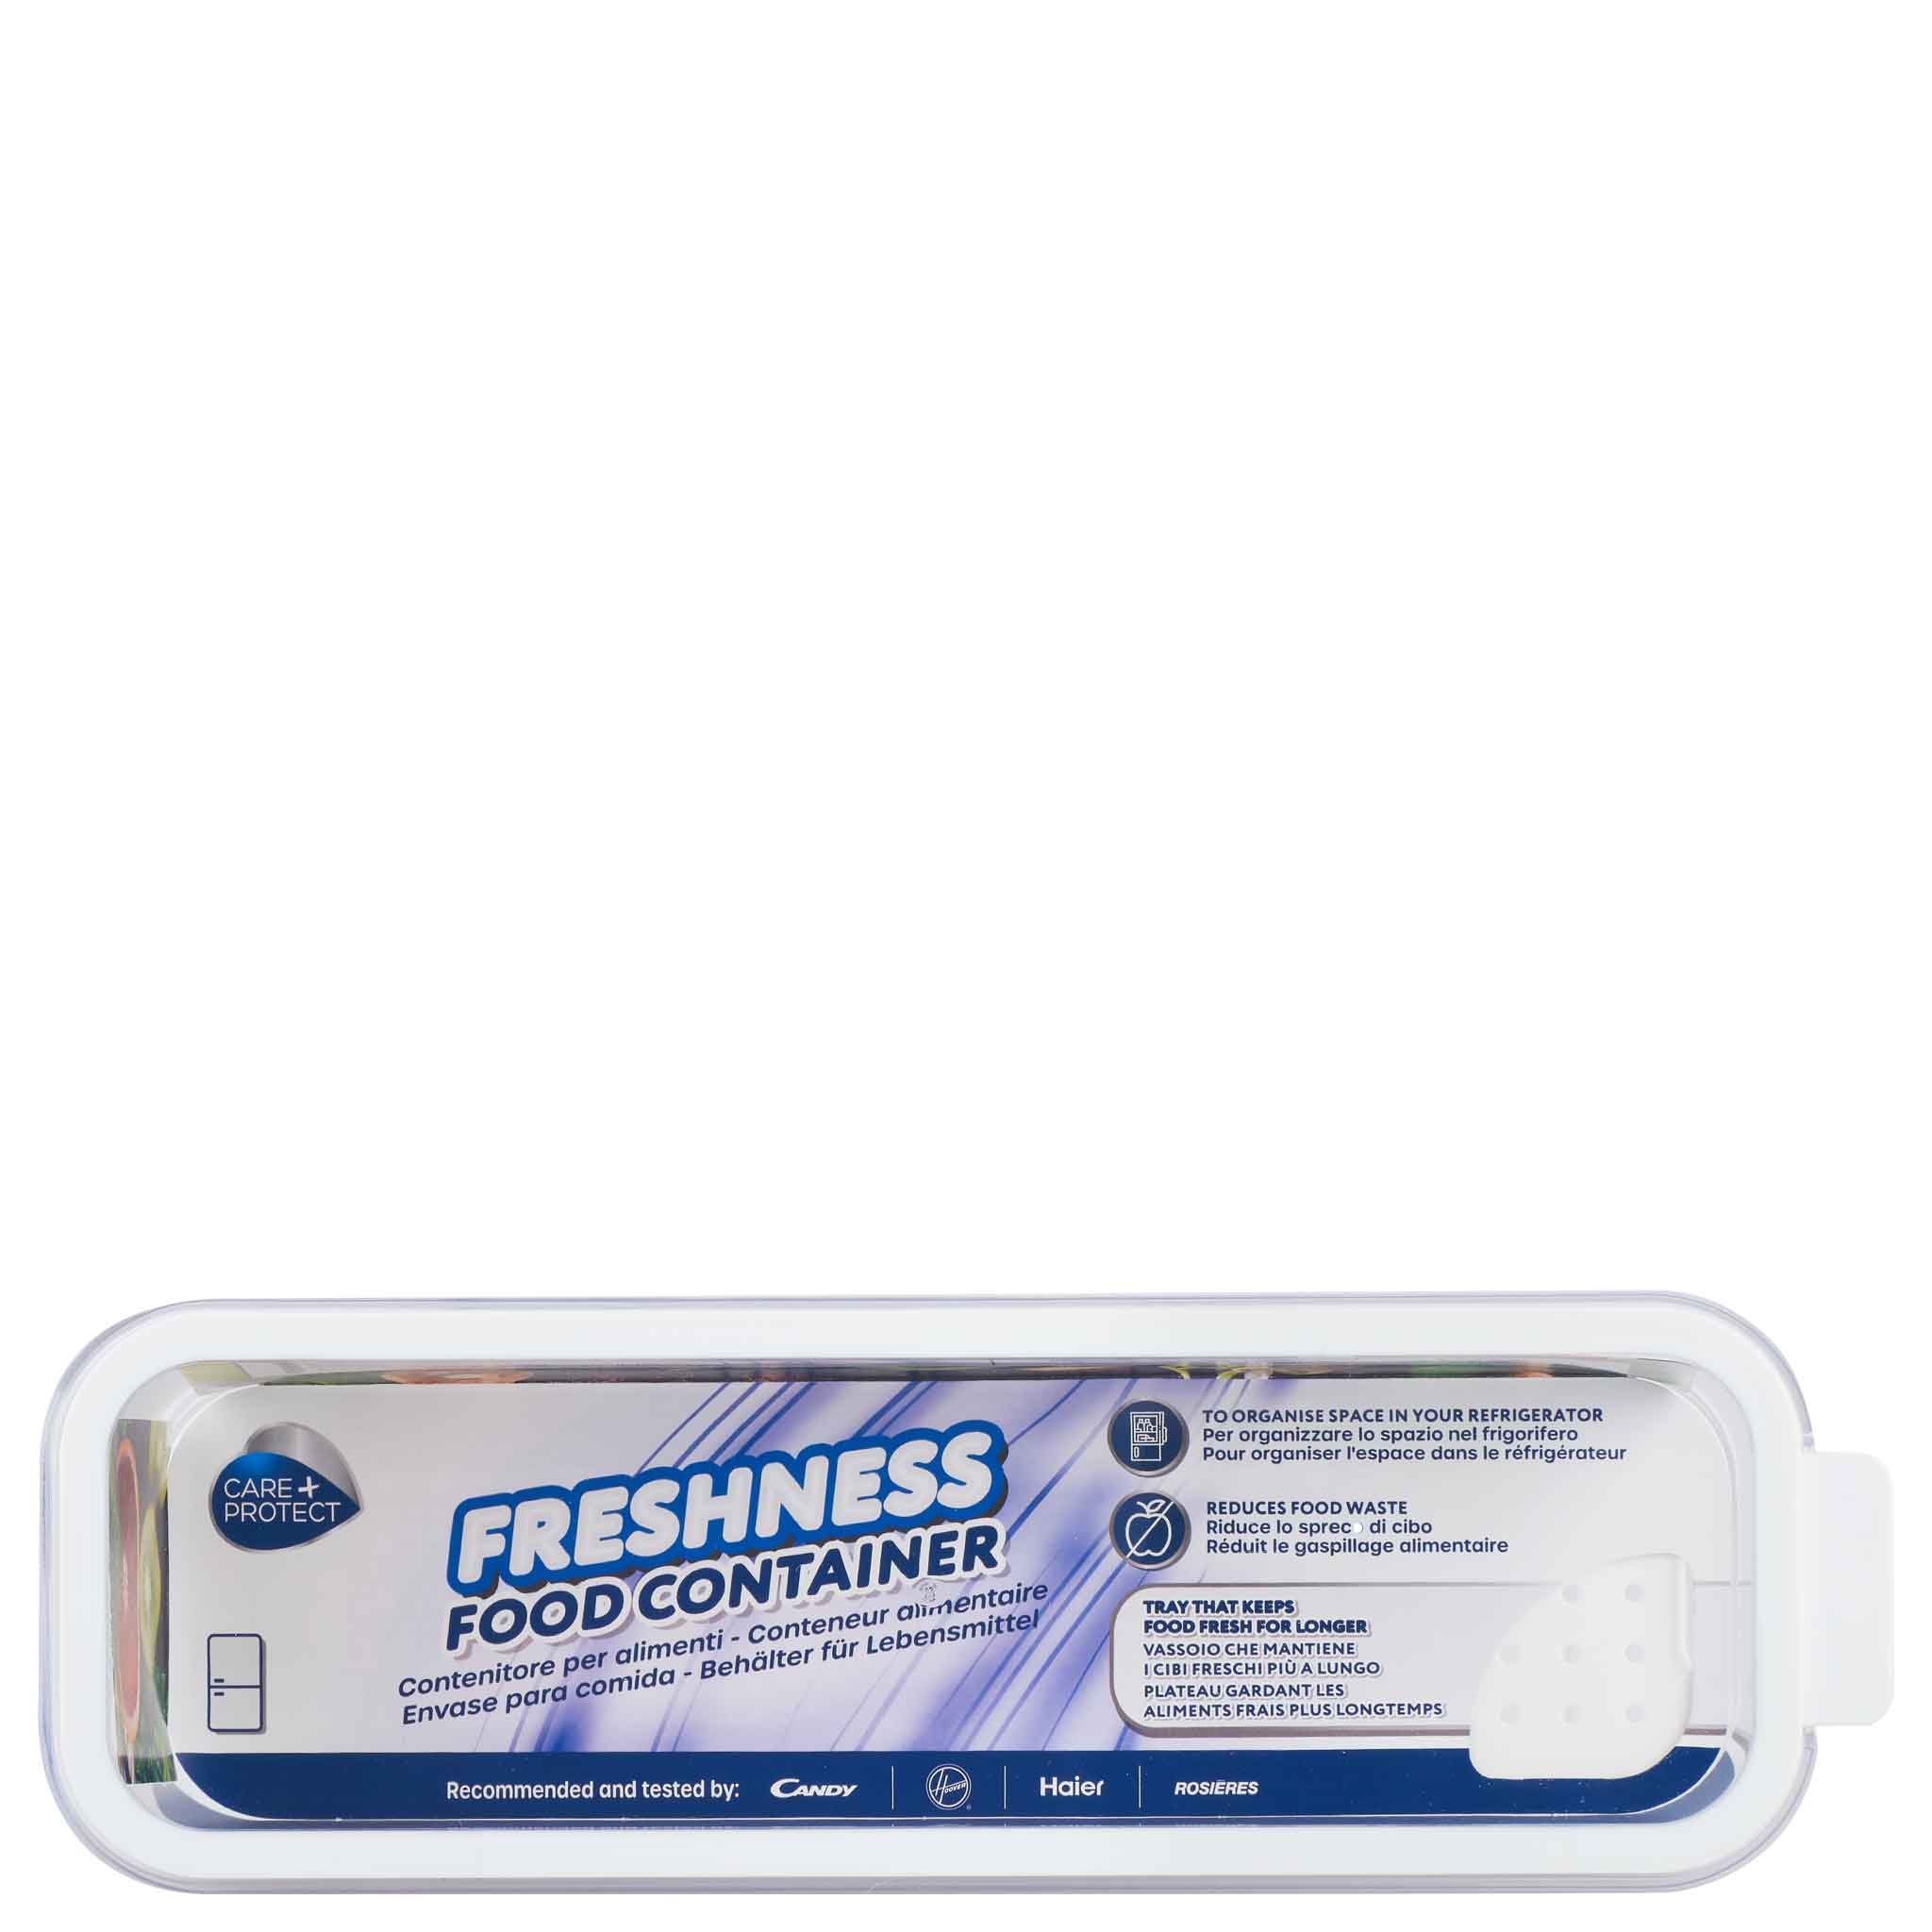 Freshness Food Container, 2l